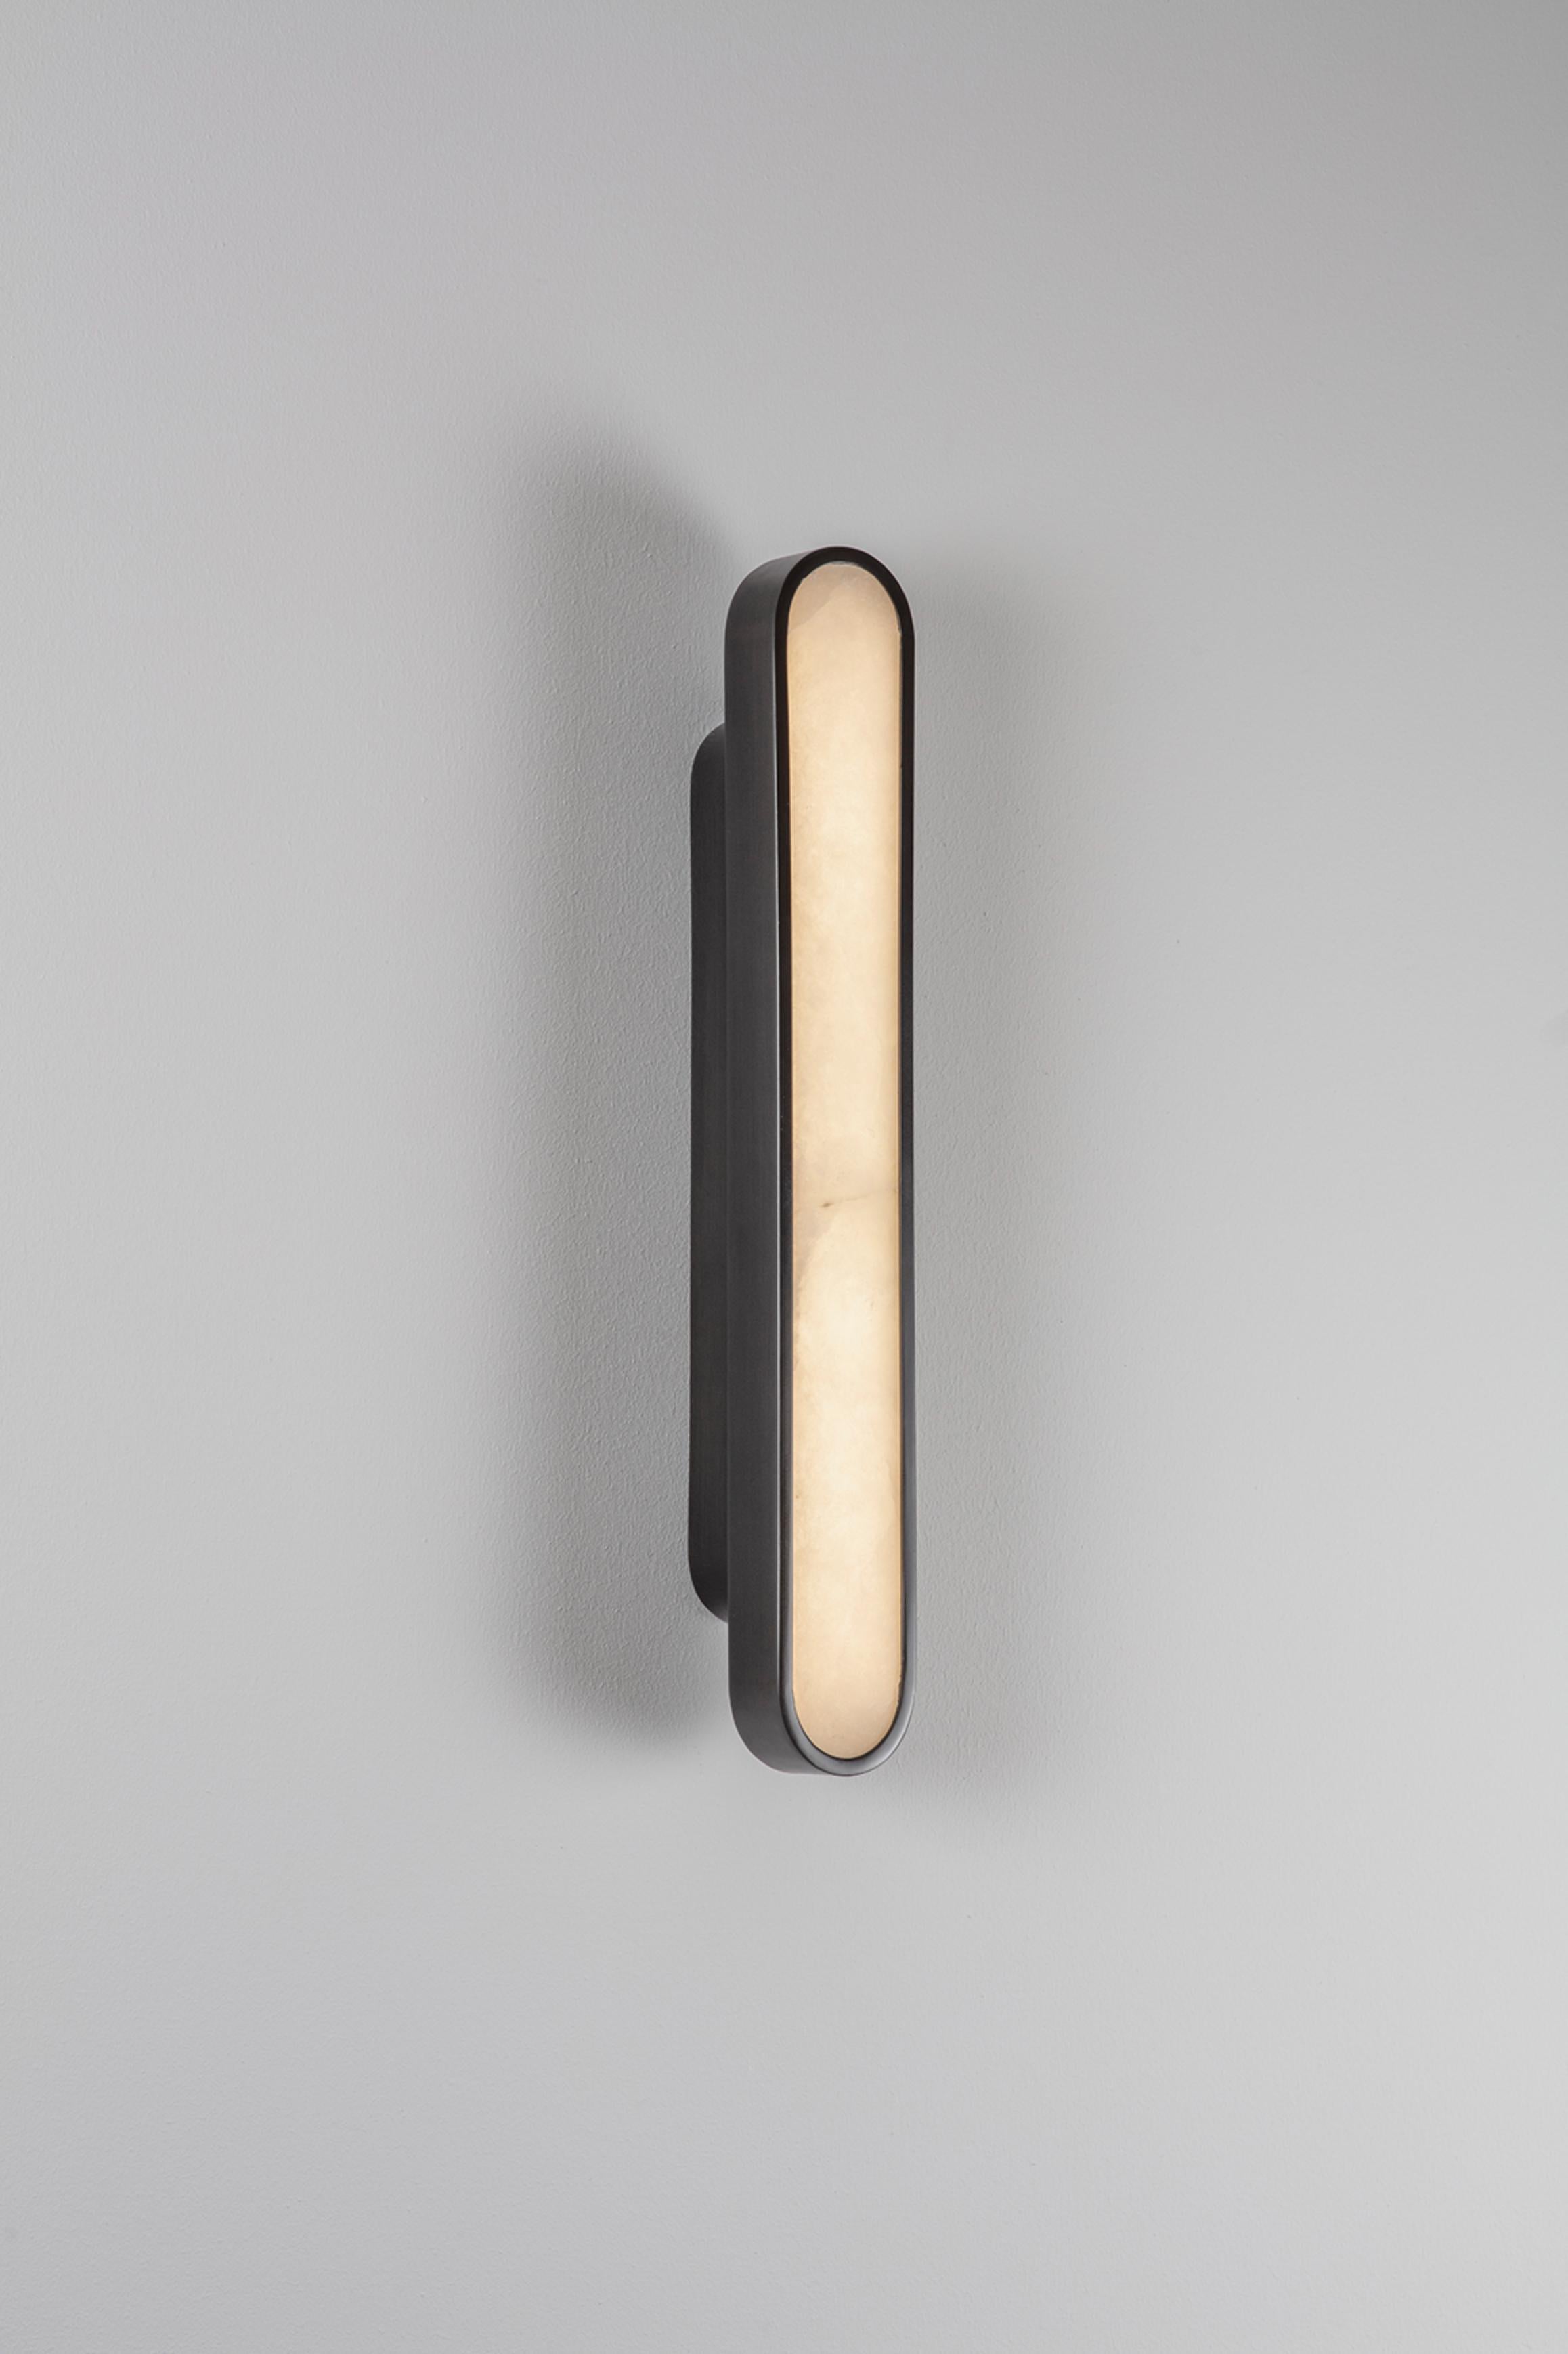 Set of 2 capsule black wall lights by Square in Circle.
Dimensions: D 5 x W 5.5 x H 40 cm.
Materials: Brushed brass/ opaque glass.
Other finishes available.

Perfect rounded rectangular shape wall light. Metal wall light is neatly fixed with the